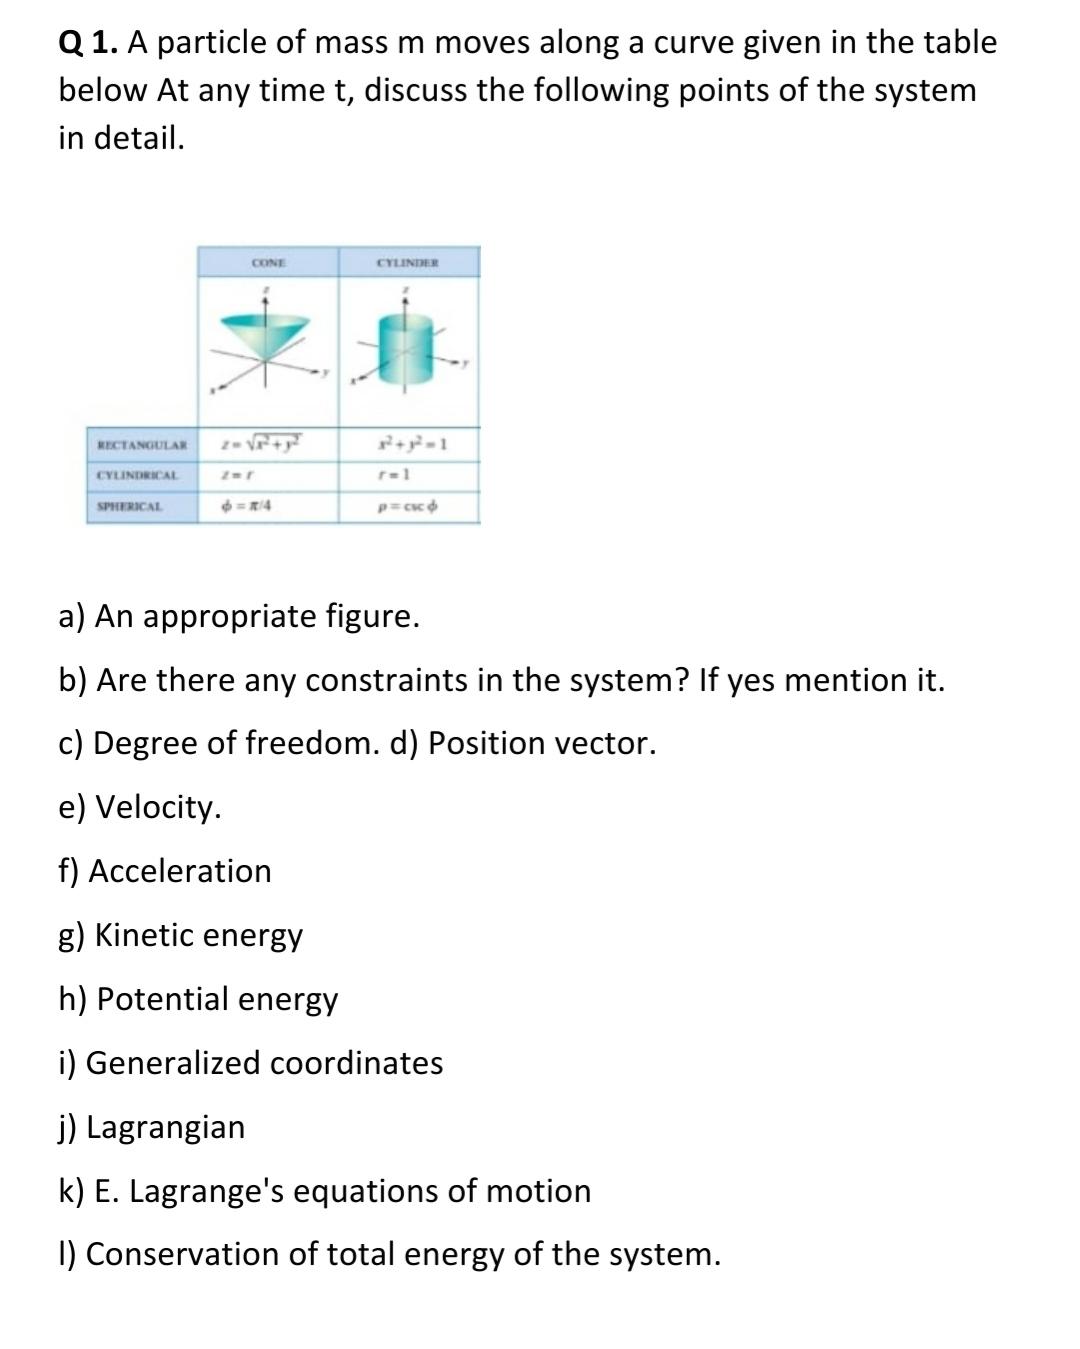 Q 1. A particle of mass m moves along a curve given in the table below At any time t, discuss the following